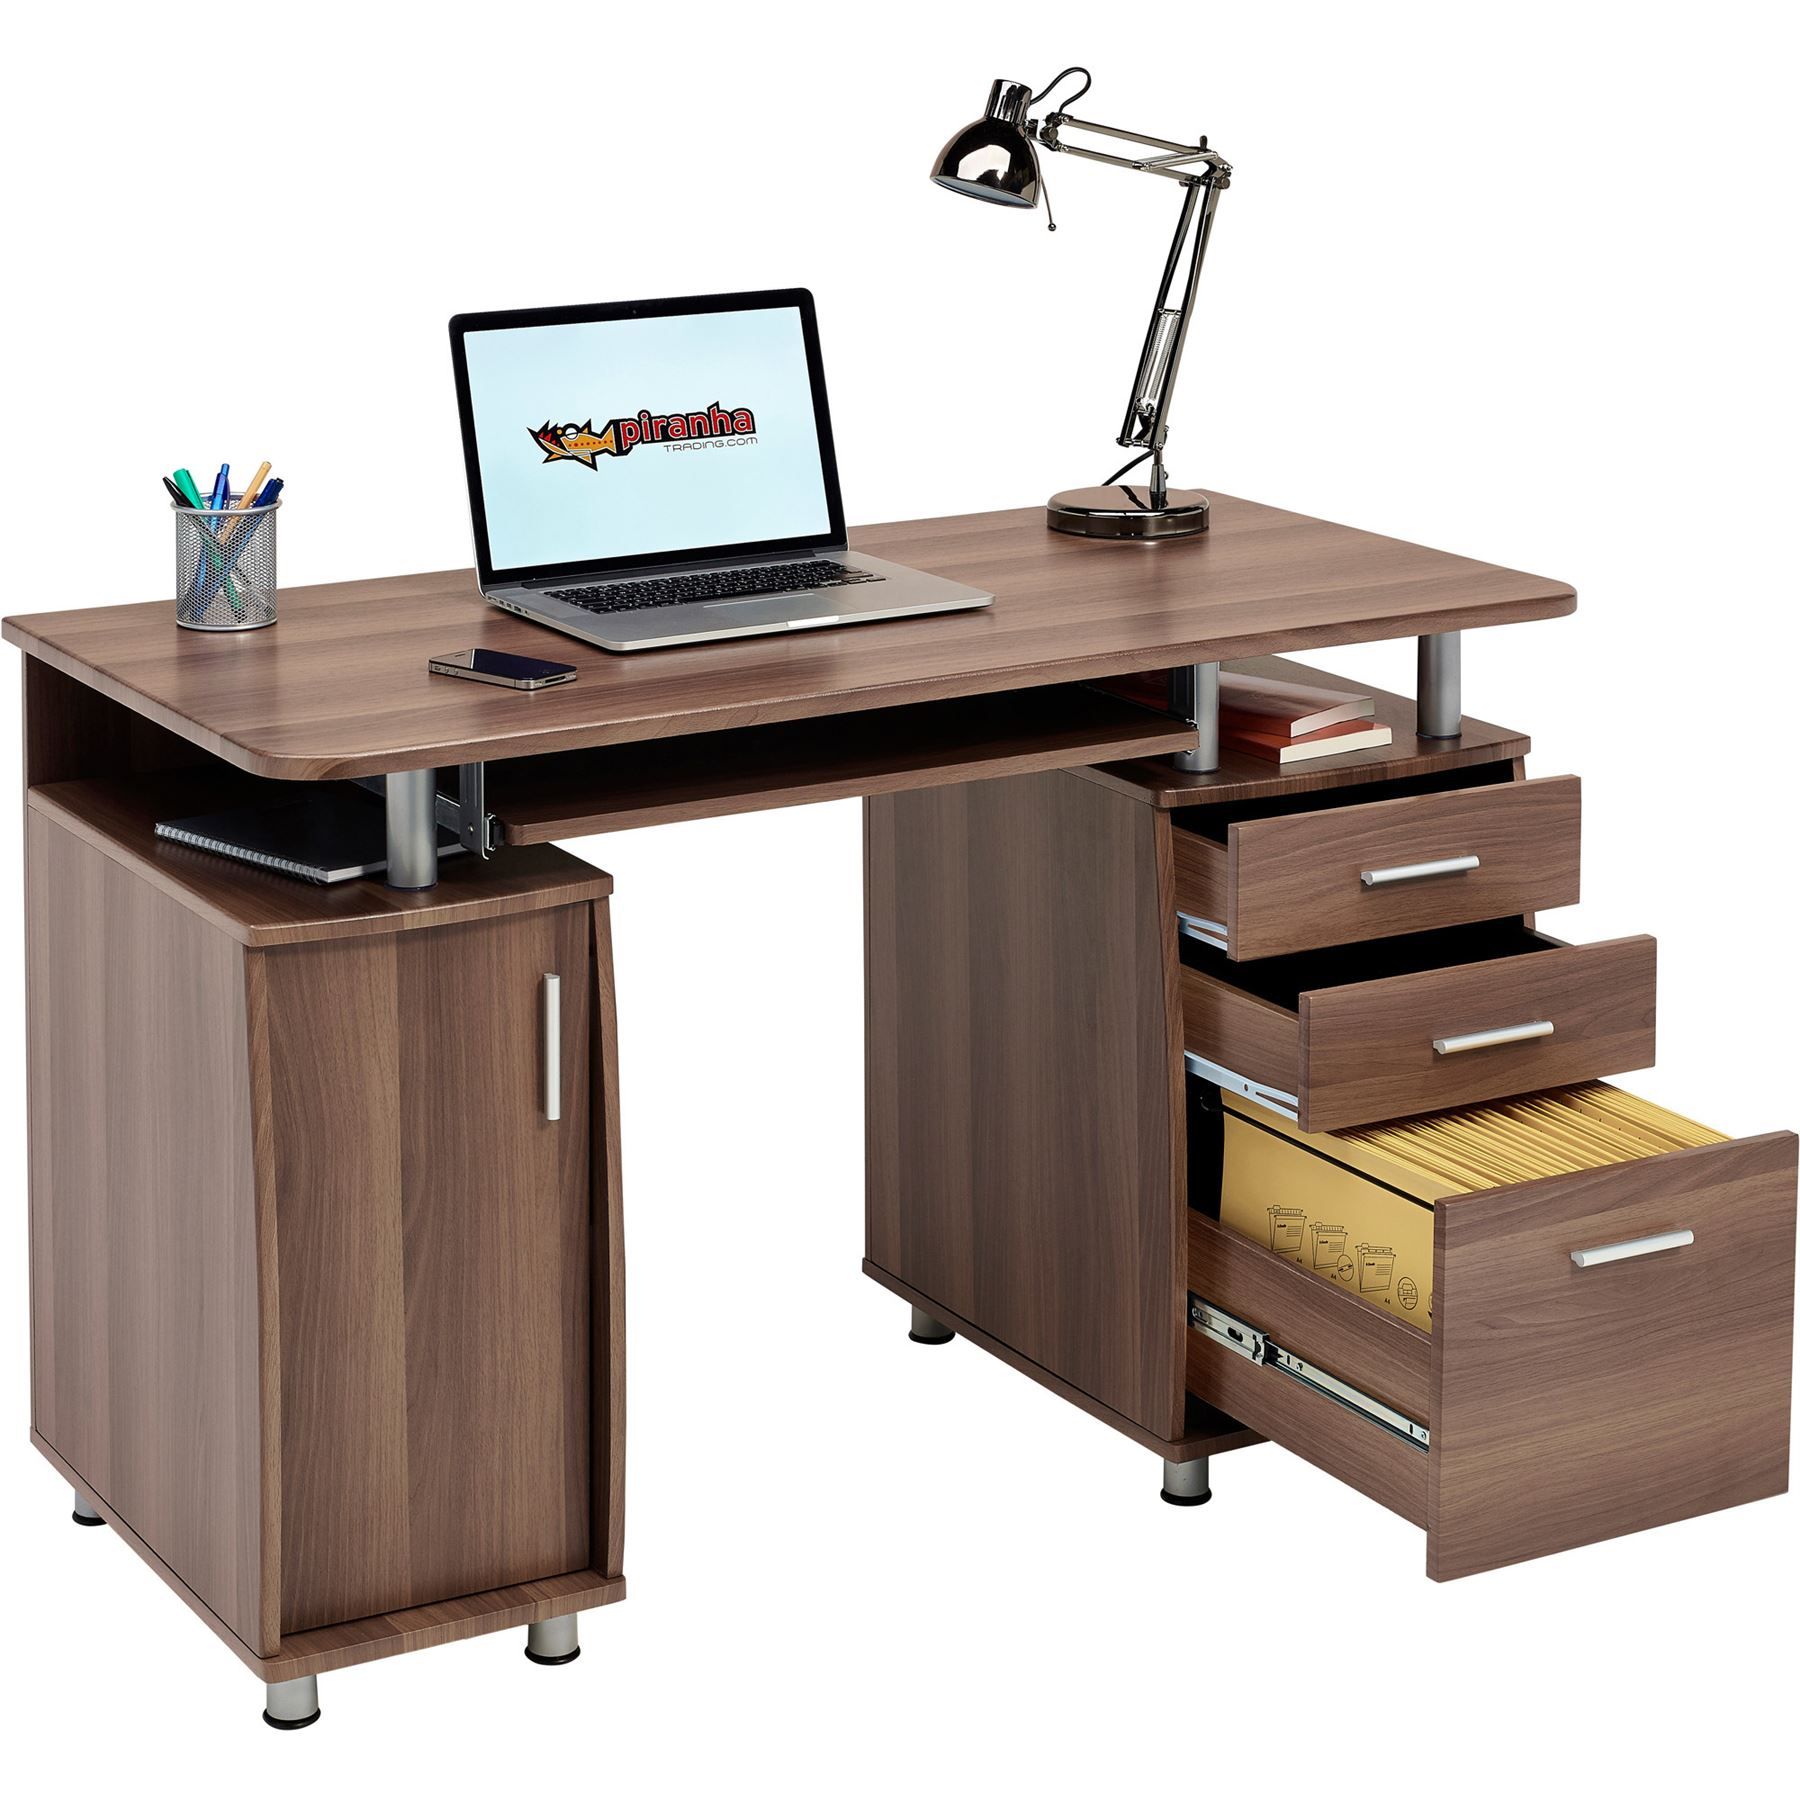 Computer Desk With Storage & A4 Filing Drawer Home Office Piranha Regarding Executive Desks With Dual Storage (View 15 of 15)